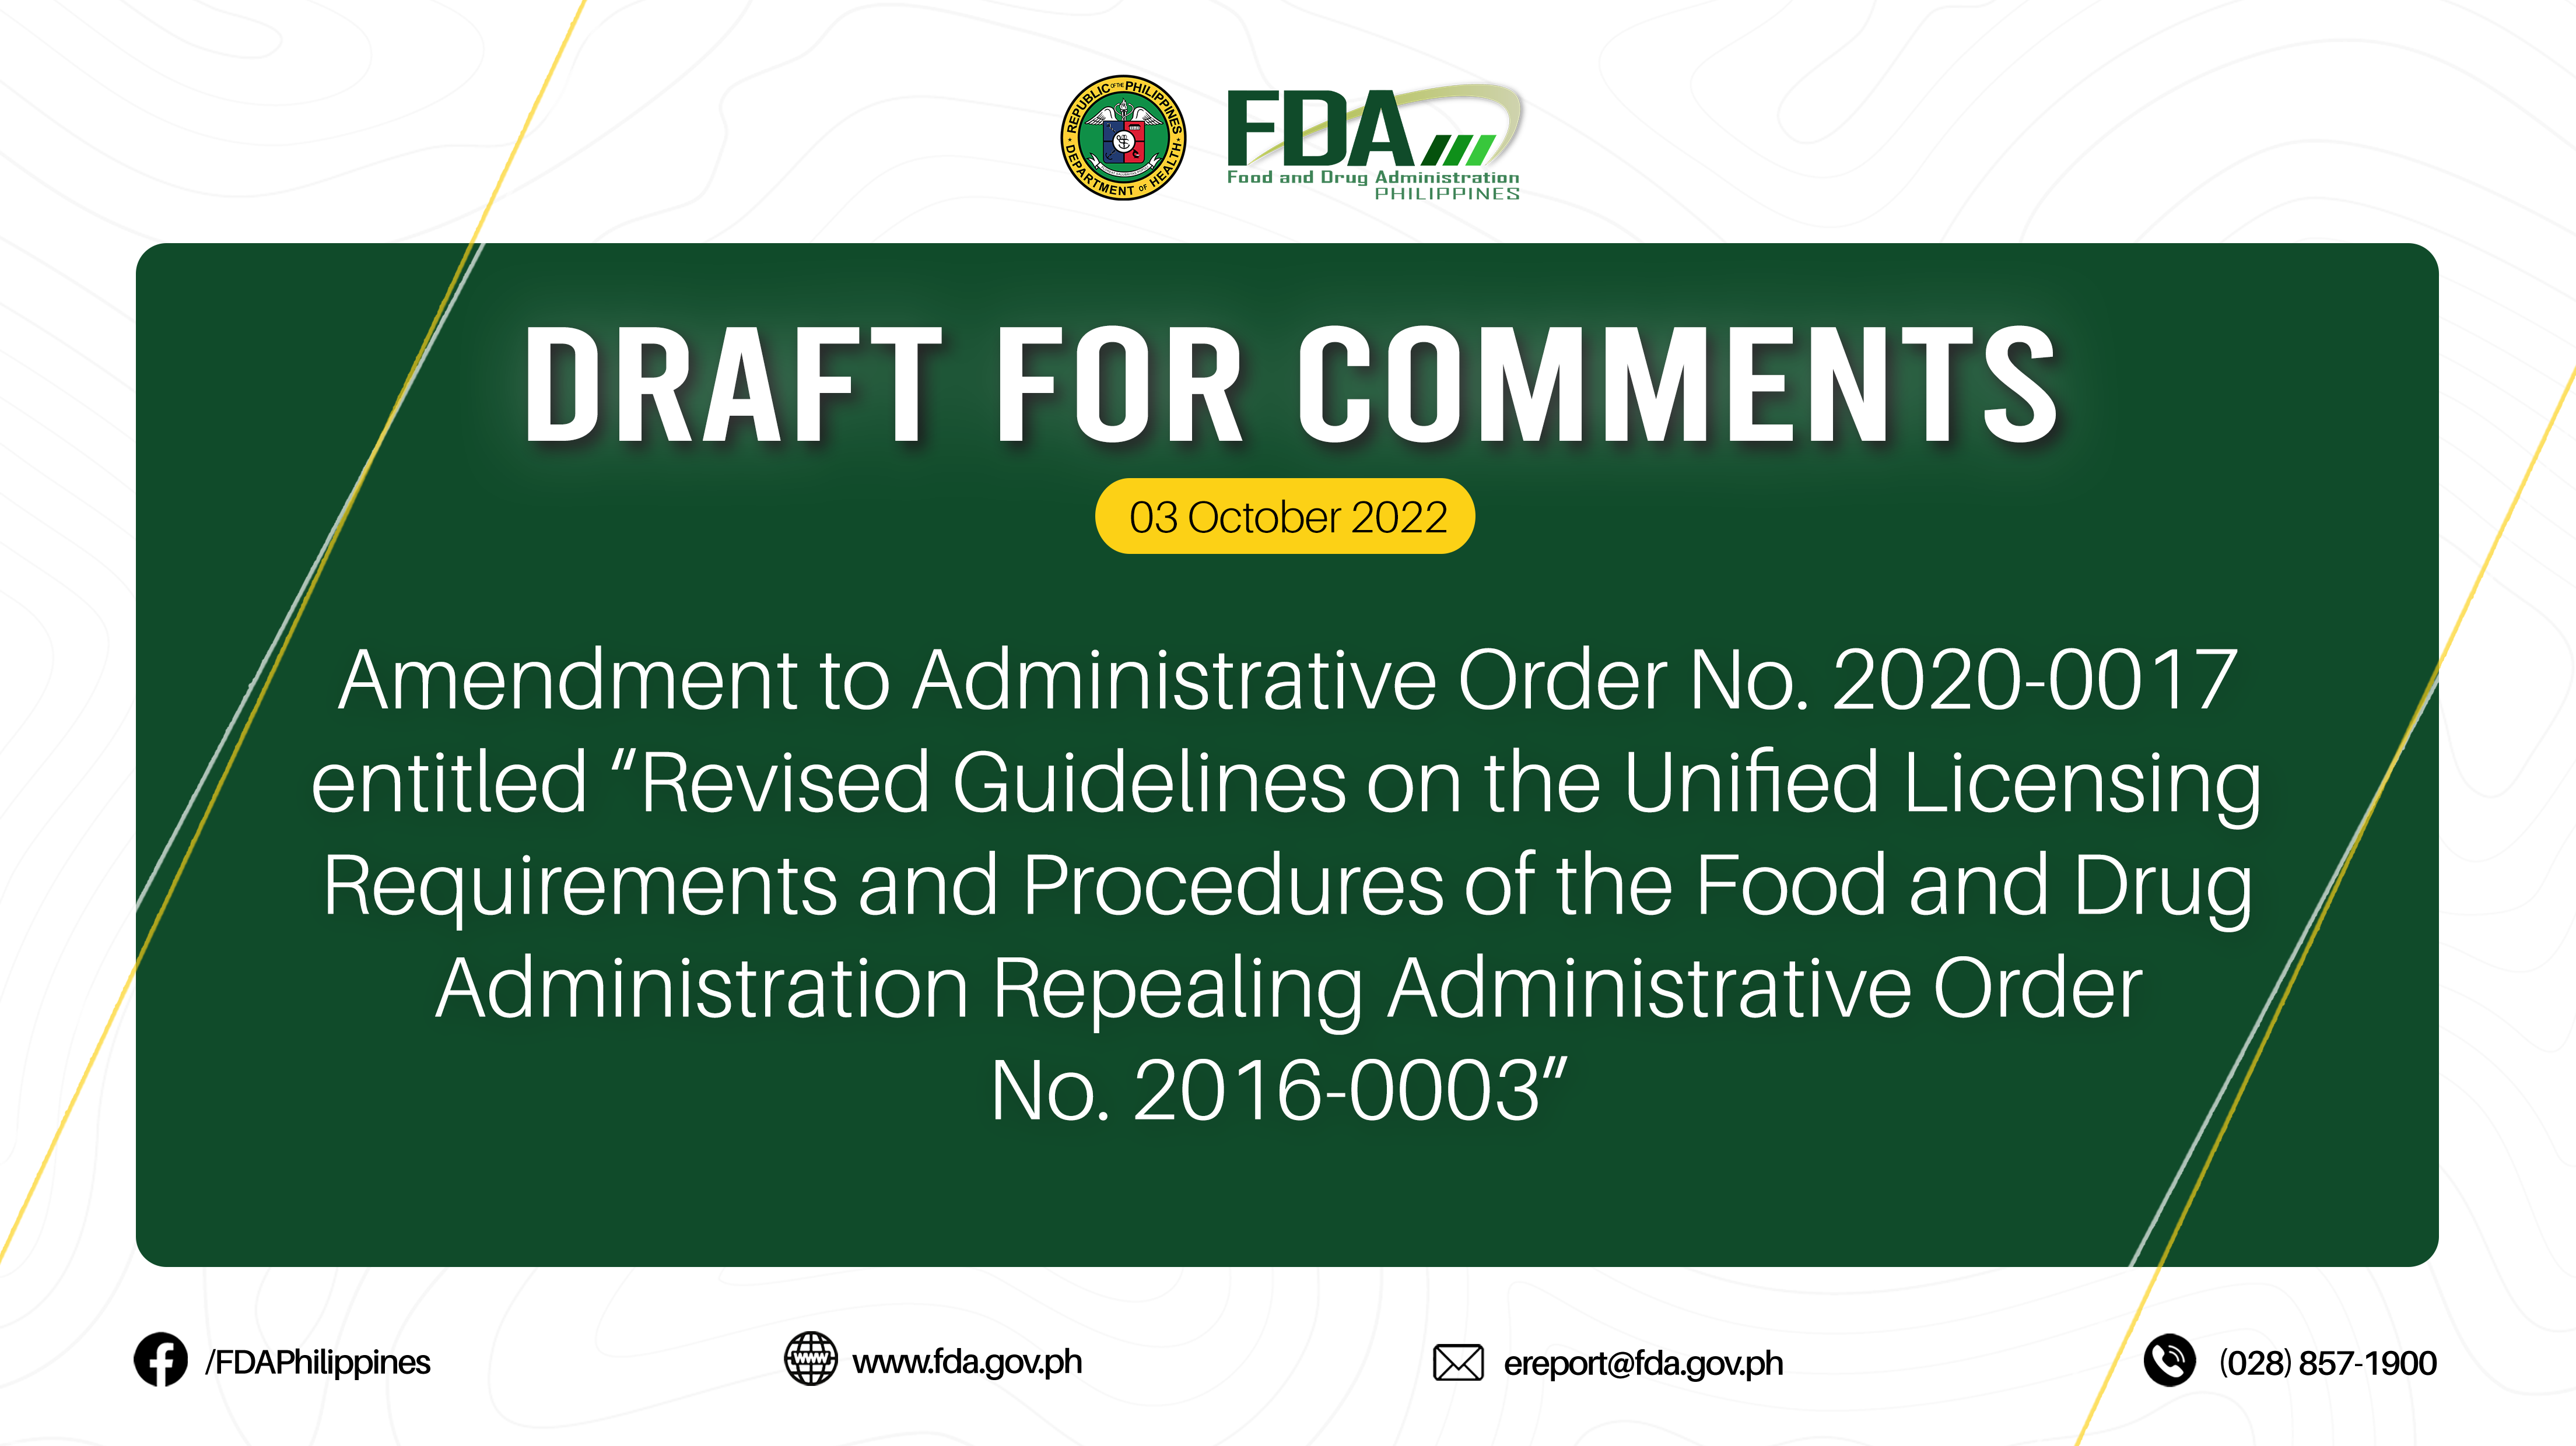 Draft for Comments || Amendment to Administrative Order No. 2020-0017 entitled, “Revised Guidelines on the Unified Licensing Requirements and Procedures of the Food and Drug Administration Repealing Administrative Order No. 2016-0003”